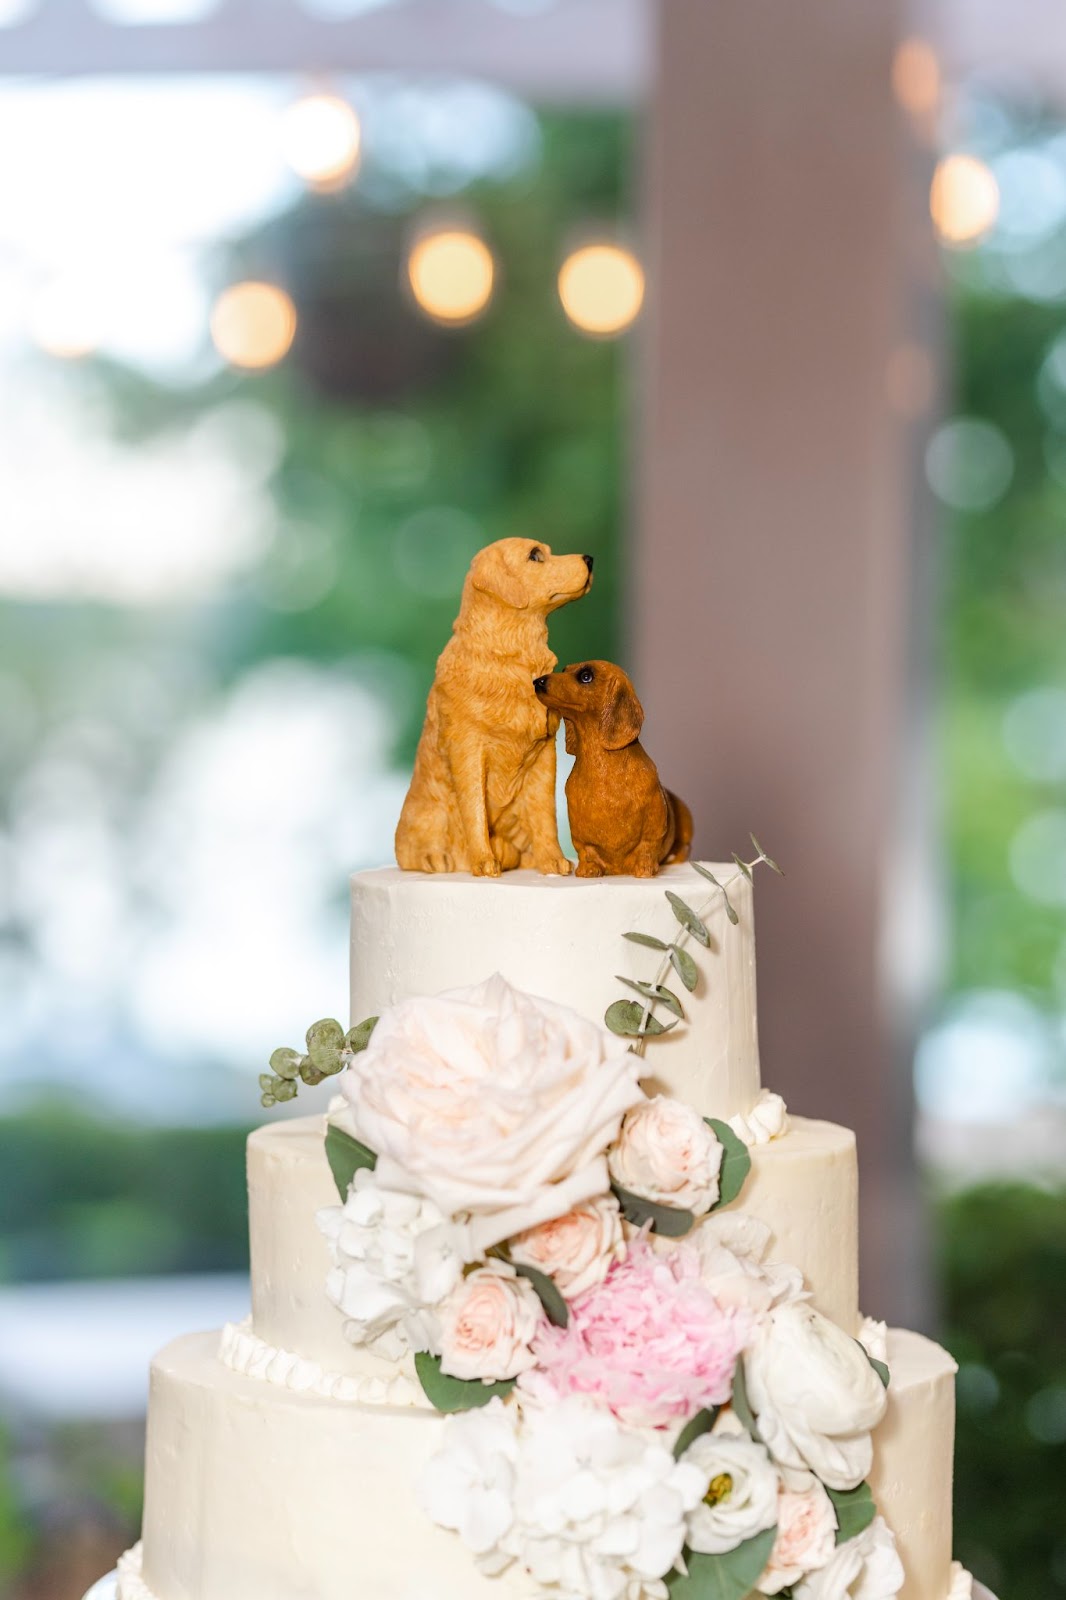 dog figurines used as cake topper